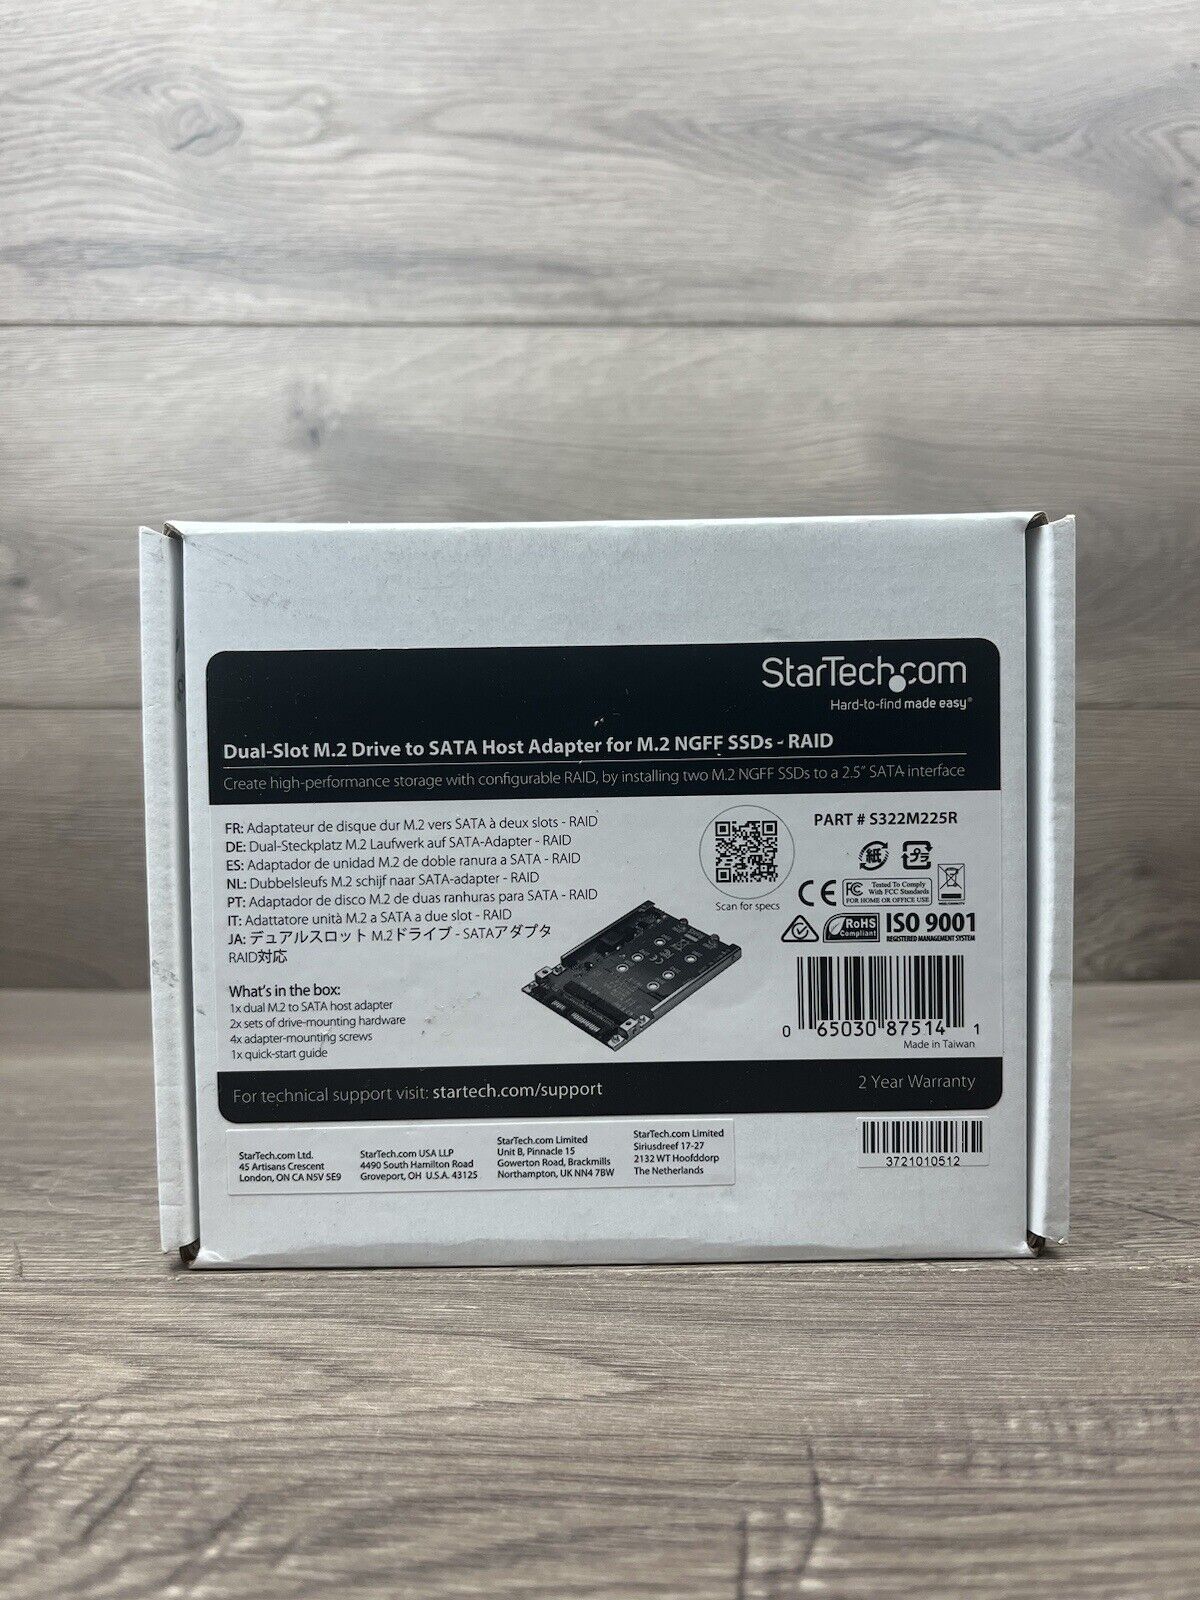 StarTech.com S322M225R M.2 to SATA Adapter - Dual Slot - for 2.5in Drive Bay - R